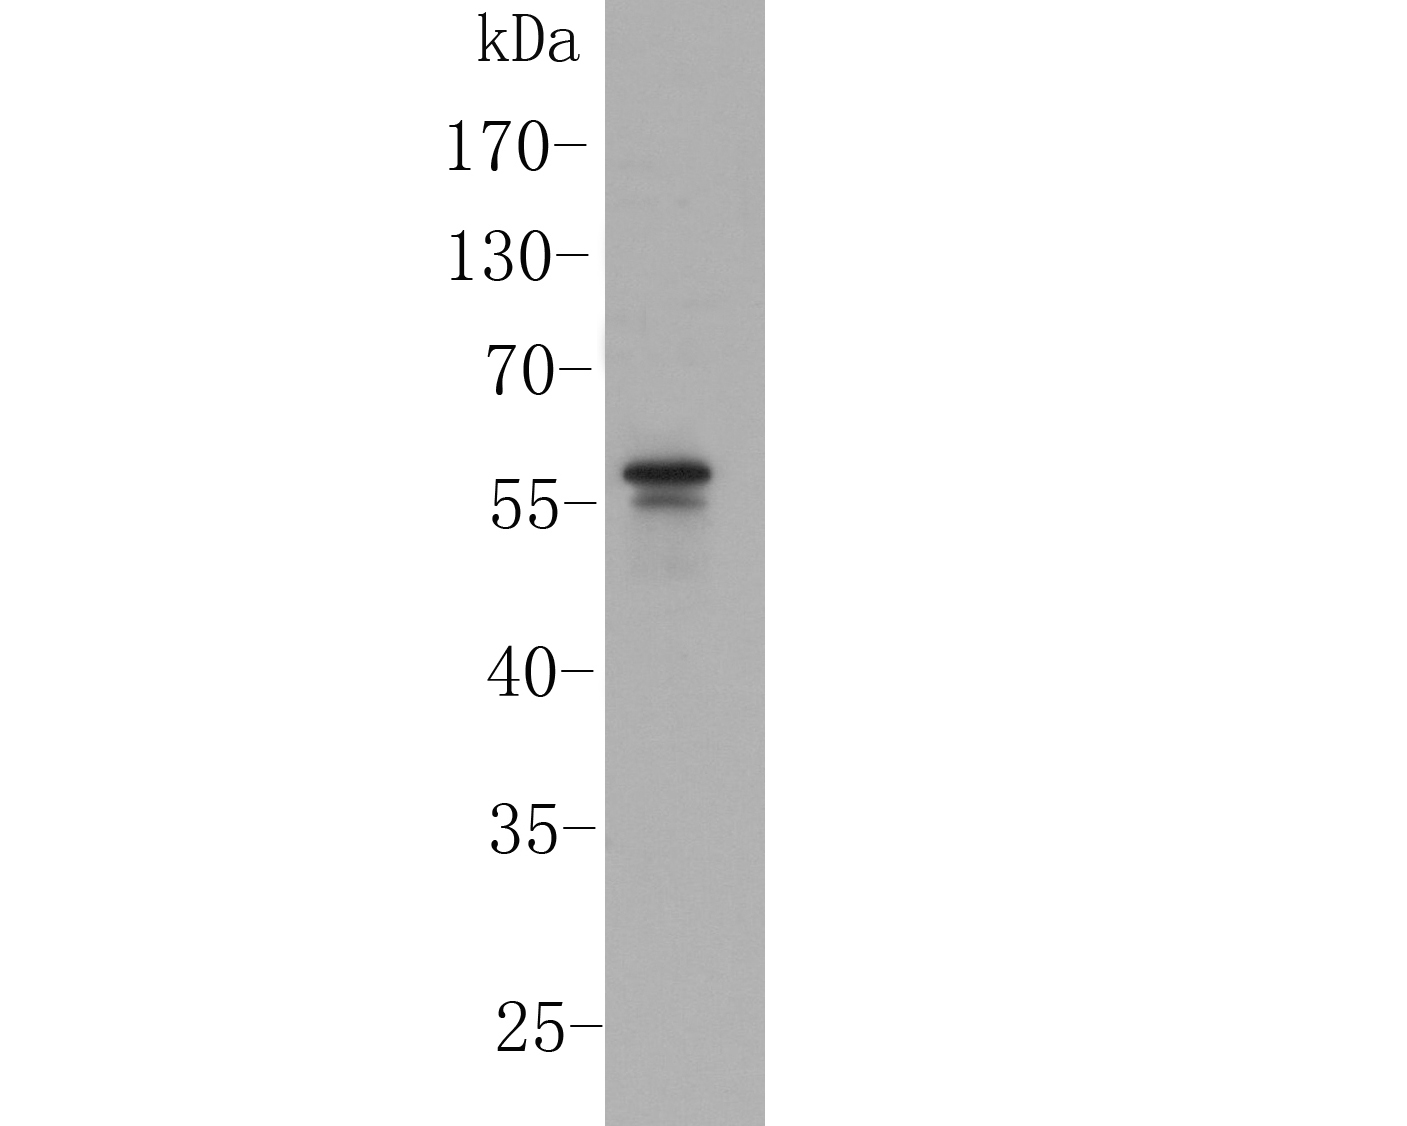 Western blot analysis of PPAR delta on mouse colon tissue lysate. Proteins were transferred to a PVDF membrane and blocked with 5% BSA in PBS for 1 hour at room temperature. The primary antibody (ER1902-24, 1/500) was used in 5% BSA at room temperature for 2 hours. Goat Anti-Rabbit IgG - HRP Secondary Antibody (HA1001) at 1:5,000 dilution was used for 1 hour at room temperature.